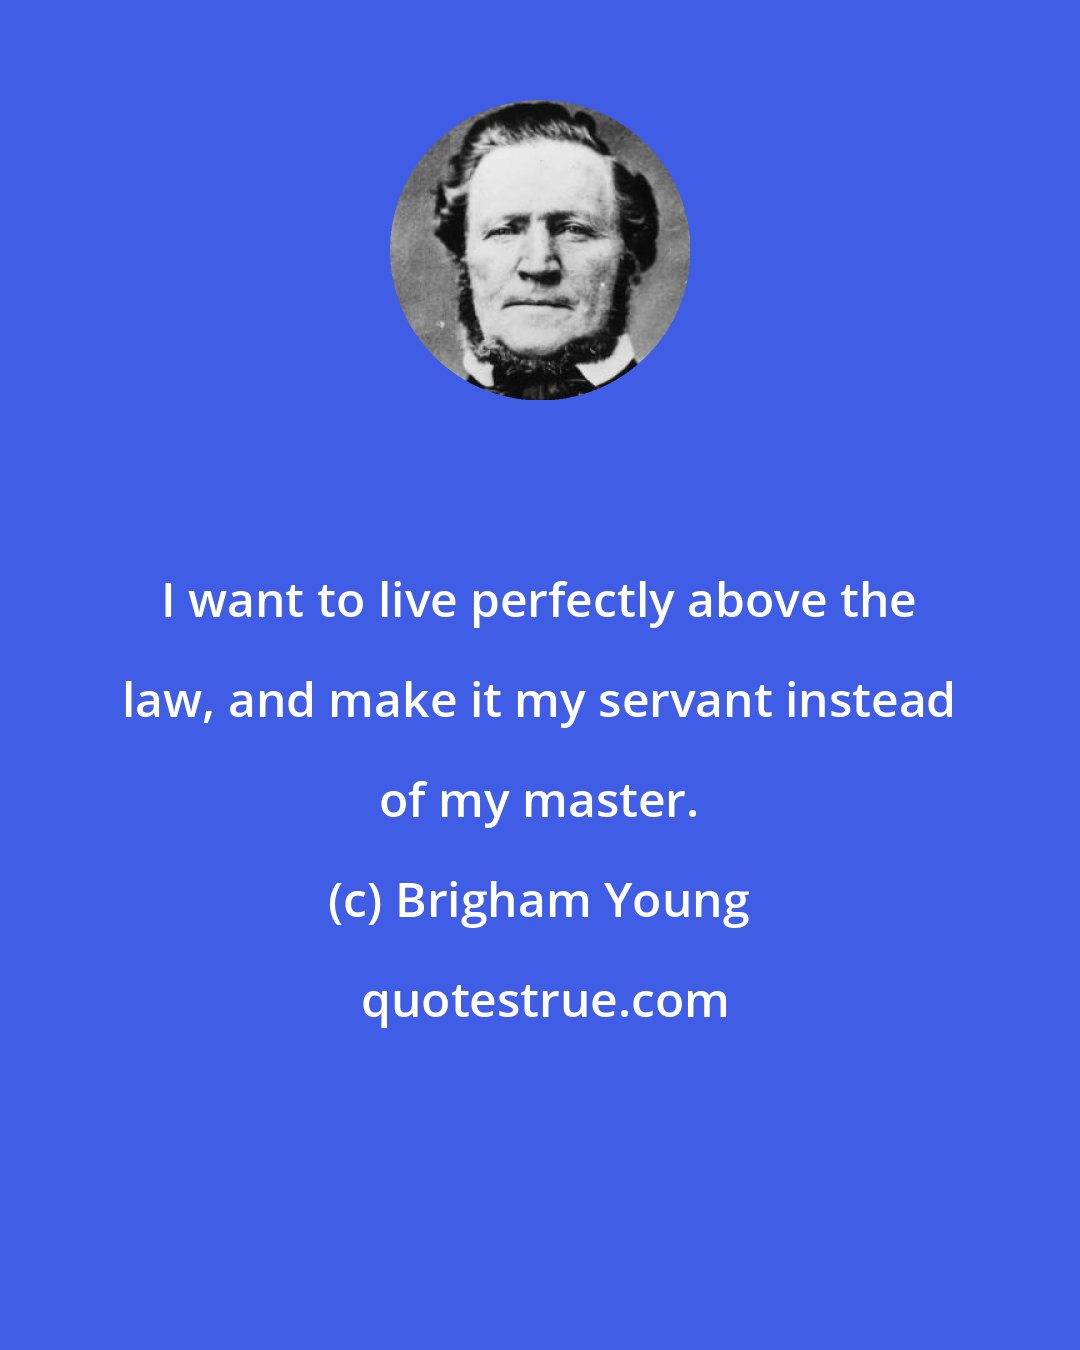 Brigham Young: I want to live perfectly above the law, and make it my servant instead of my master.